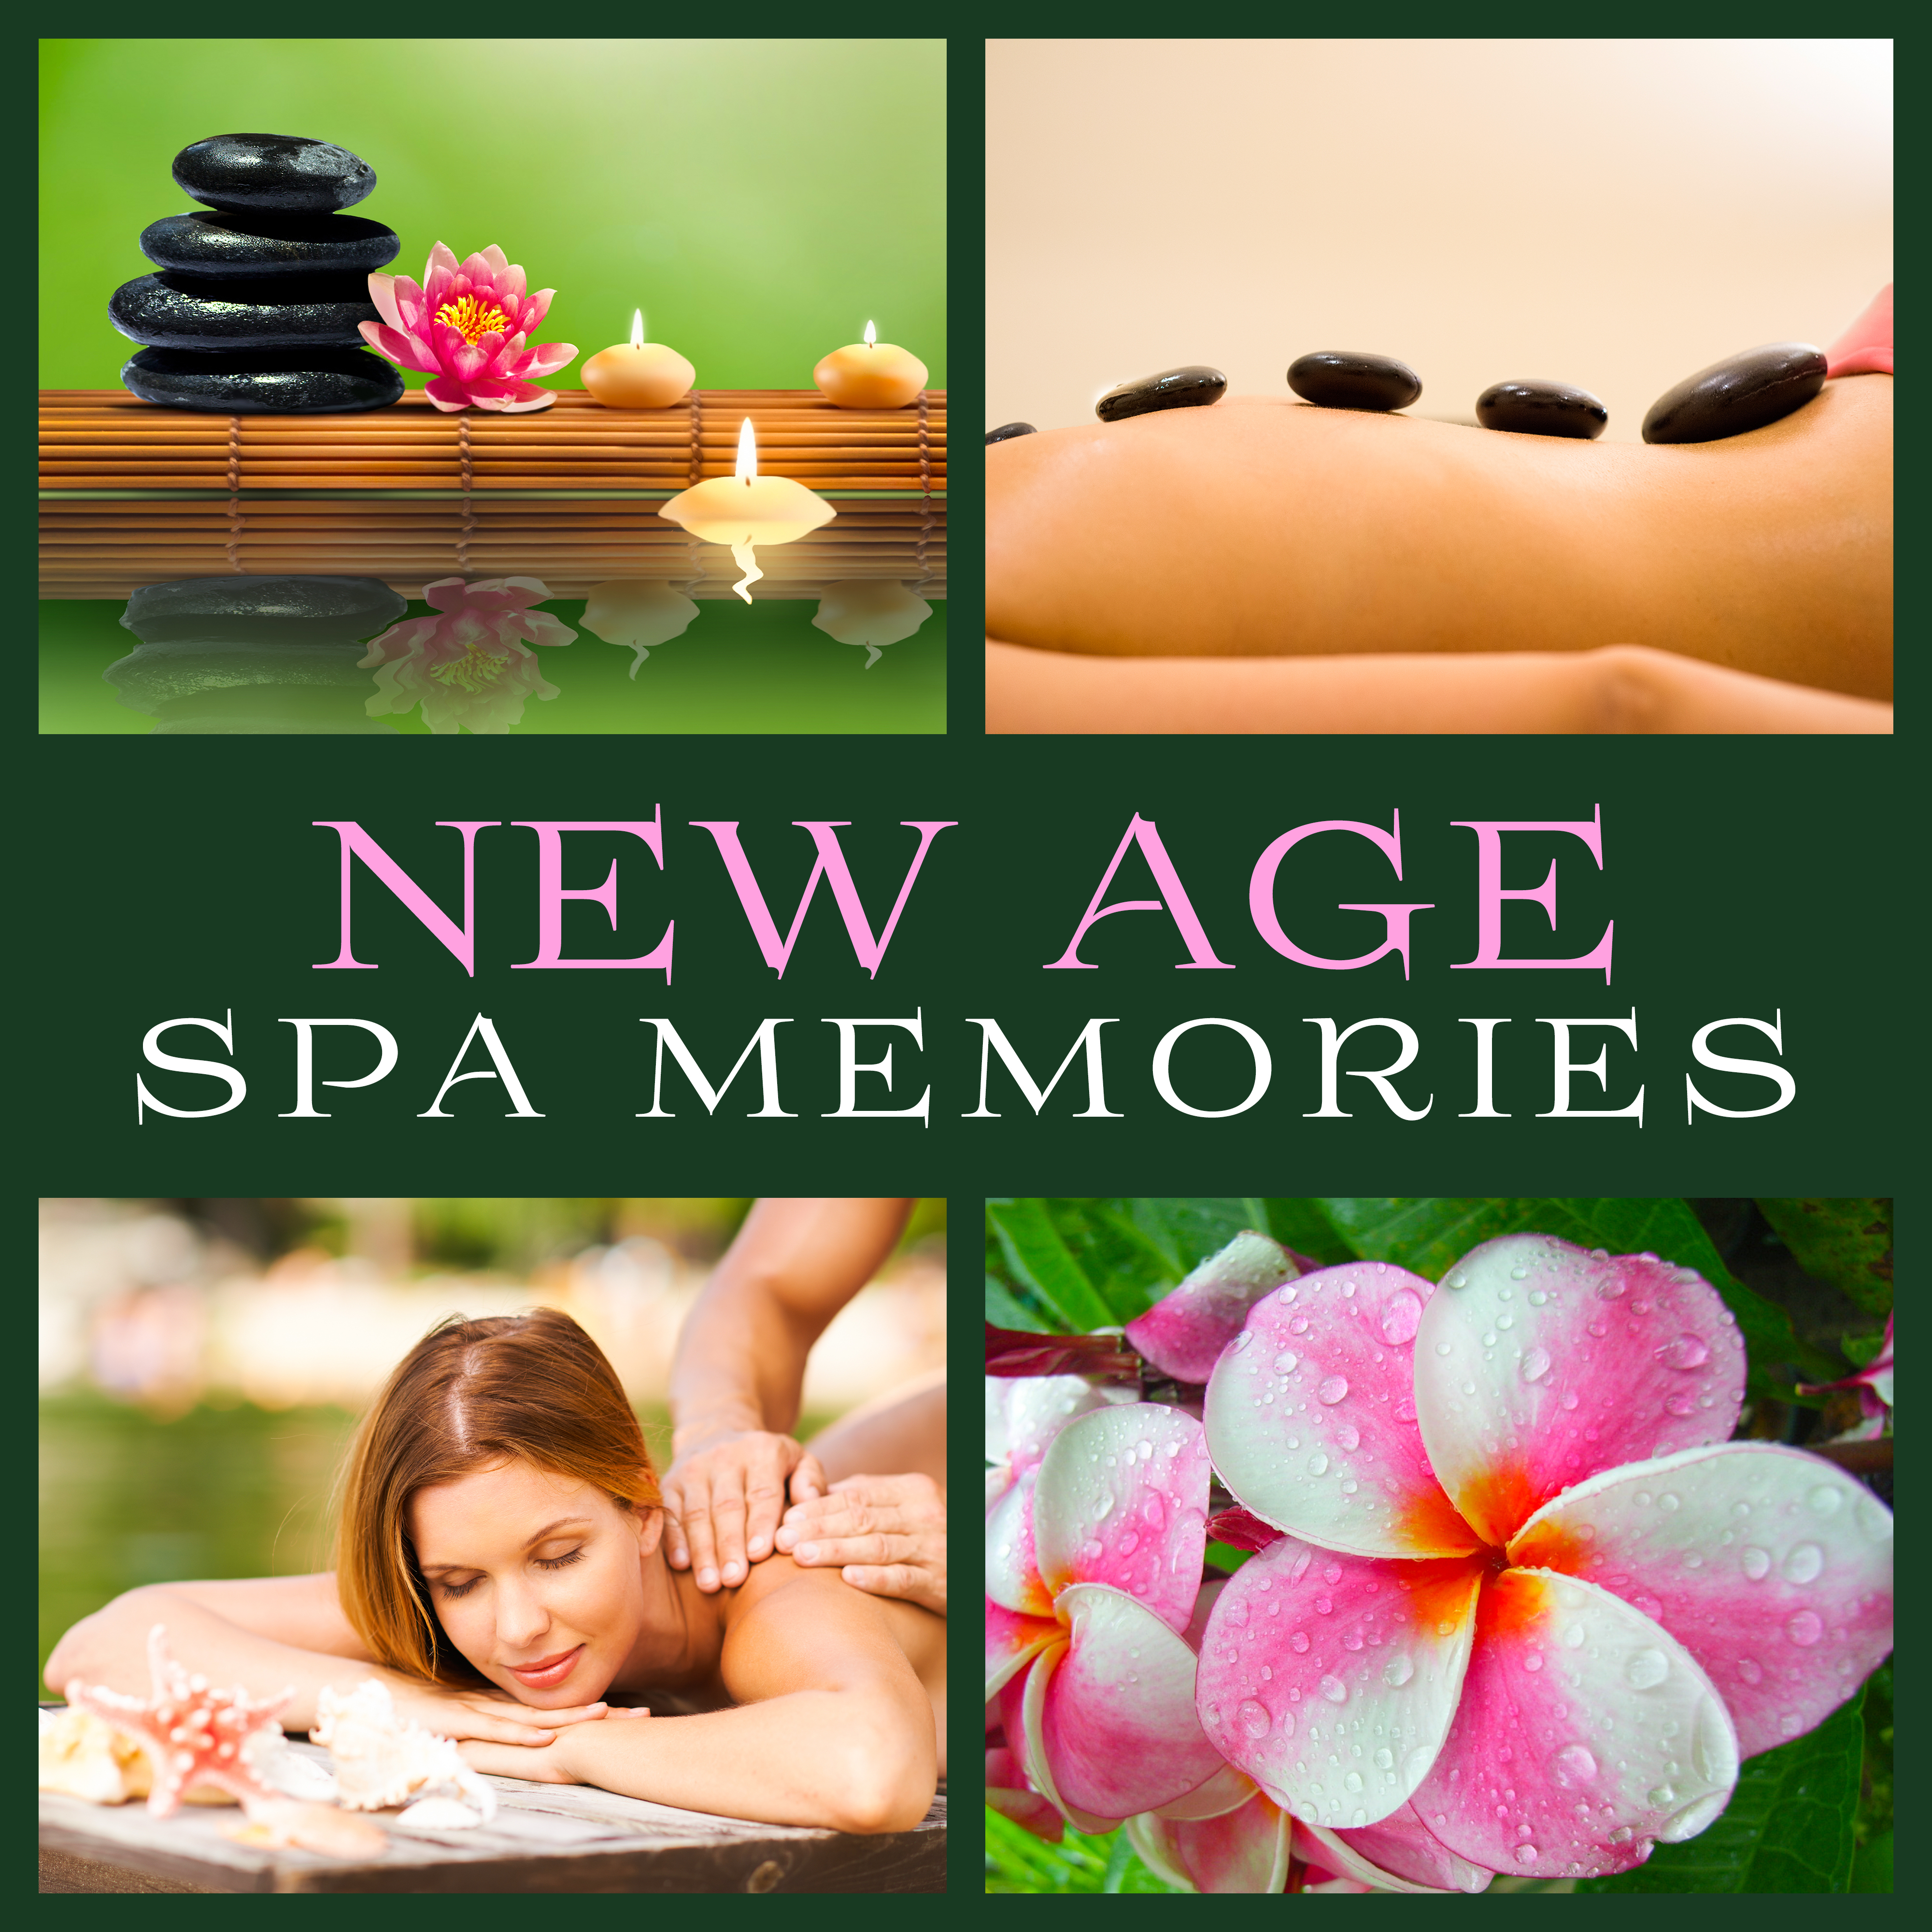 New Age Spa Memories – Time to Relax, Soft Spa Sounds, Sensual Massage Music, Full Relaxation